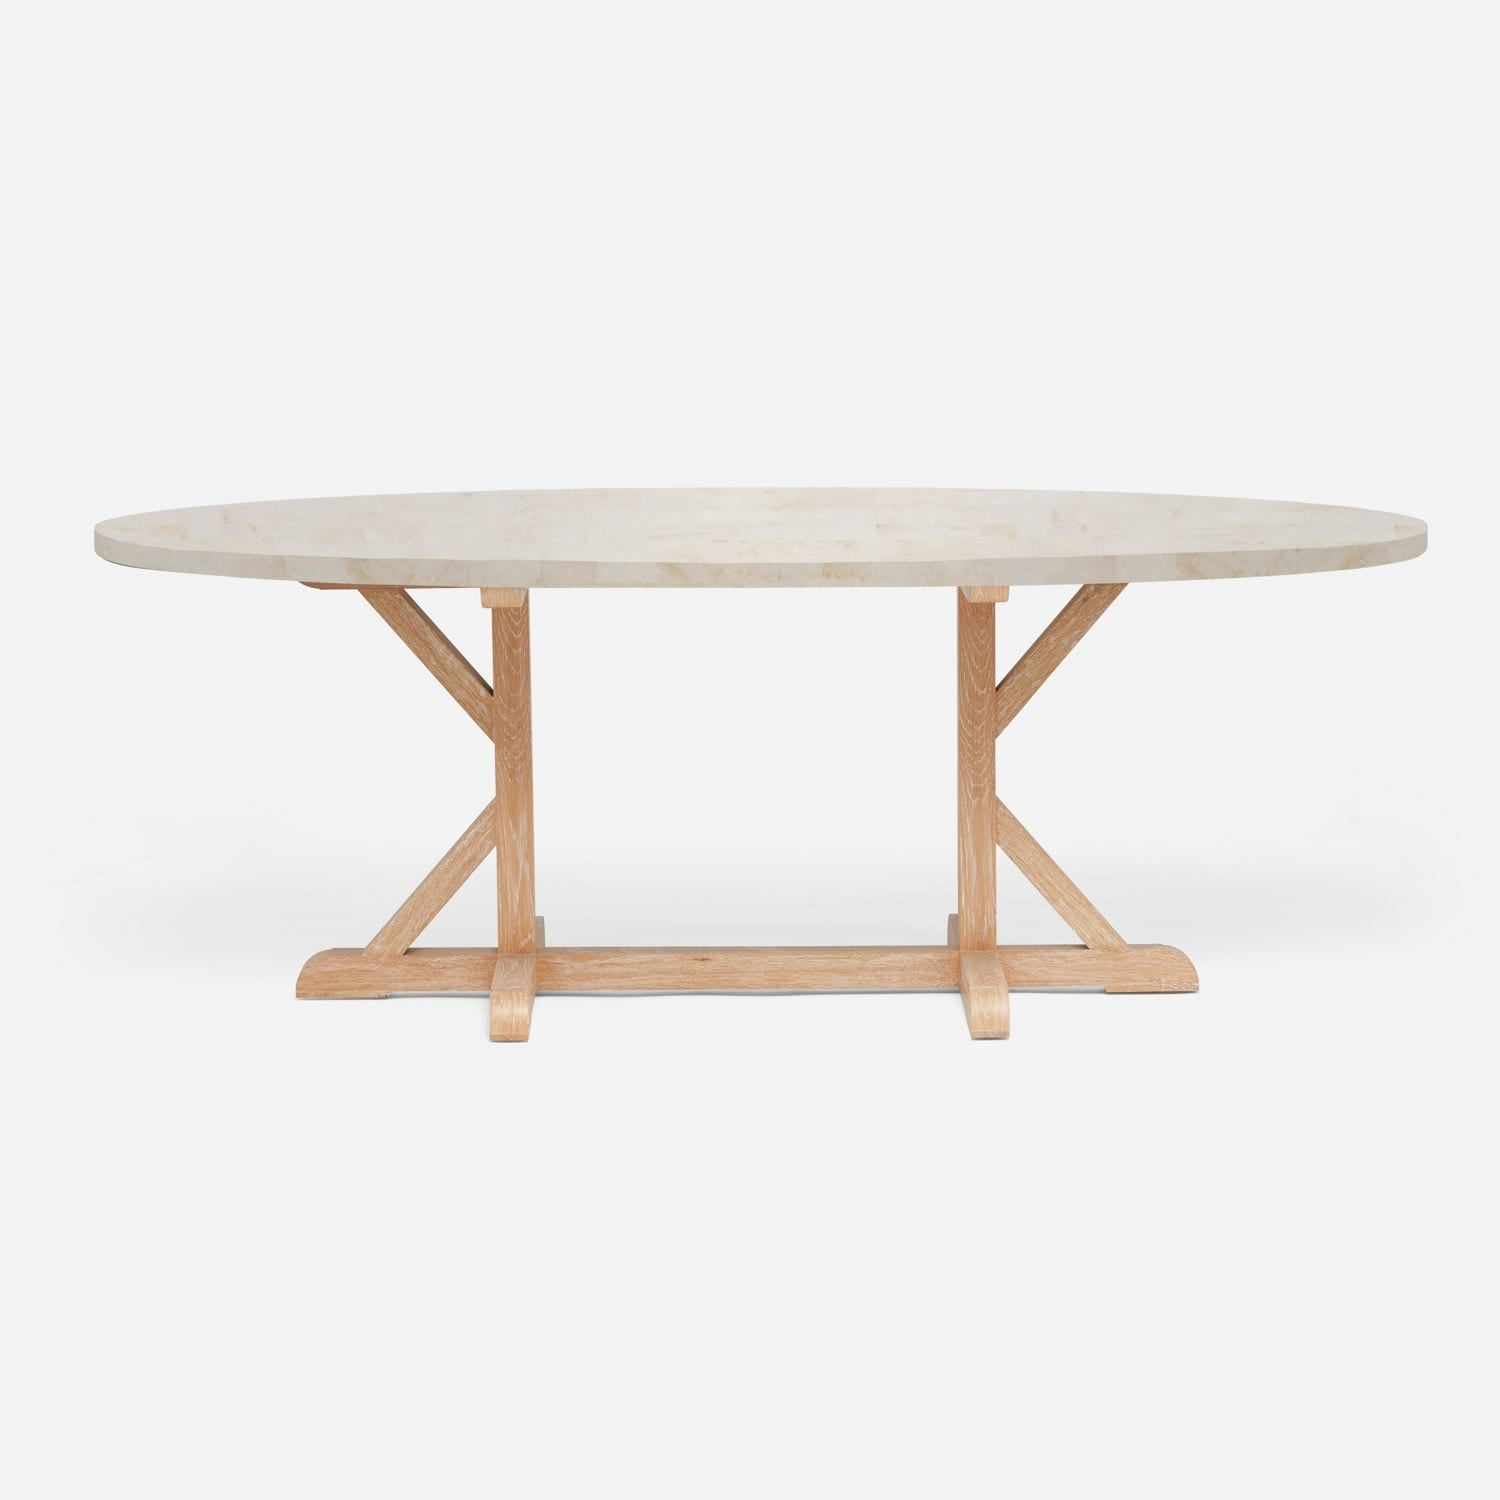 Made Goods Dane 84" x 42" x 30" White Cerused Oak Dinning Table With Oval Ice Crystal Stone Table Top